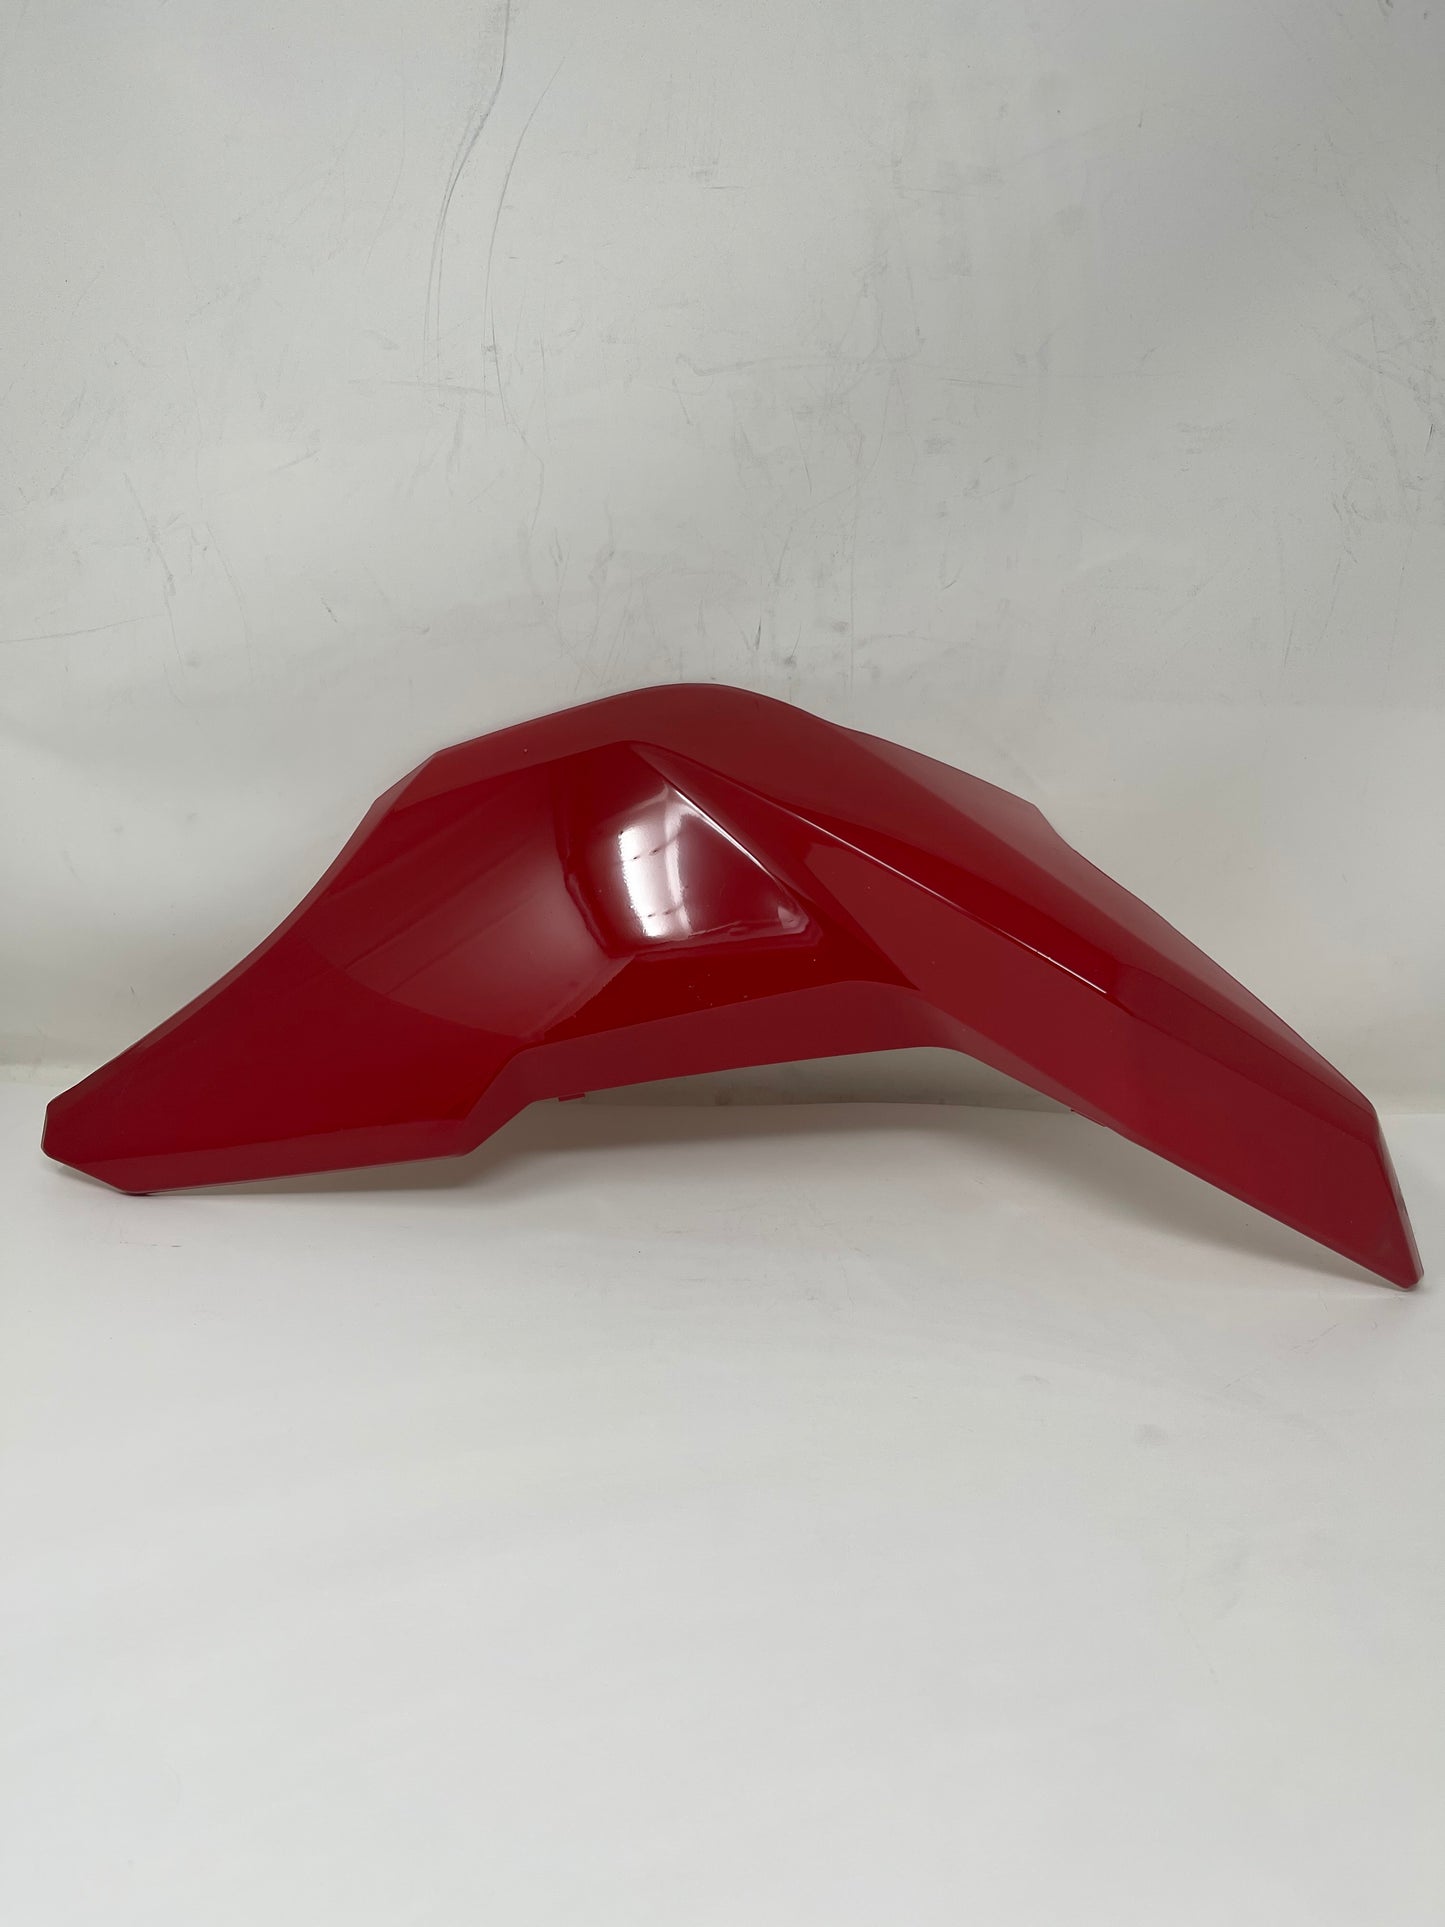 Right fuel tank cover for BD125-10 in red. Part # 125010003